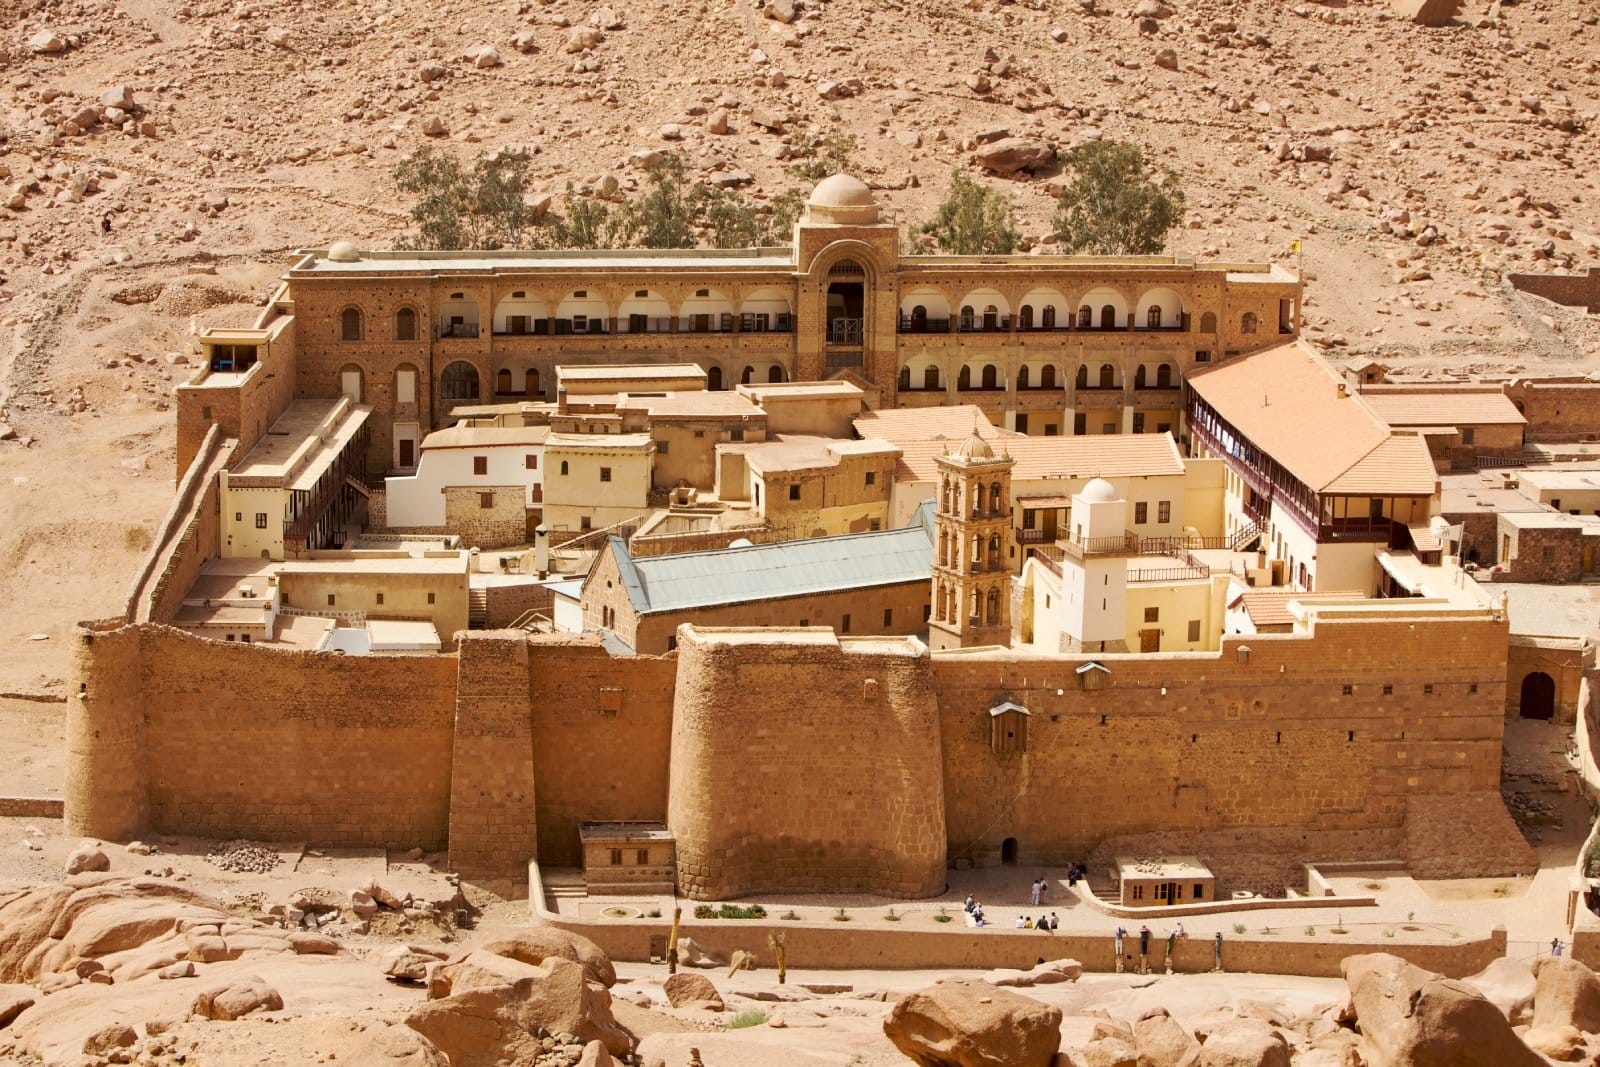 <p class="wp-caption-text">Image Credit: Shutterstock / dibrova</p>  <p><span>Mount Sinai, a site of profound biblical significance, offers visitors a chance to trek to the summit where Moses is said to have received the Ten Commandments. At its base, St. Catherine’s Monastery, one of the oldest working Christian monasteries, houses invaluable religious artifacts.</span></p>